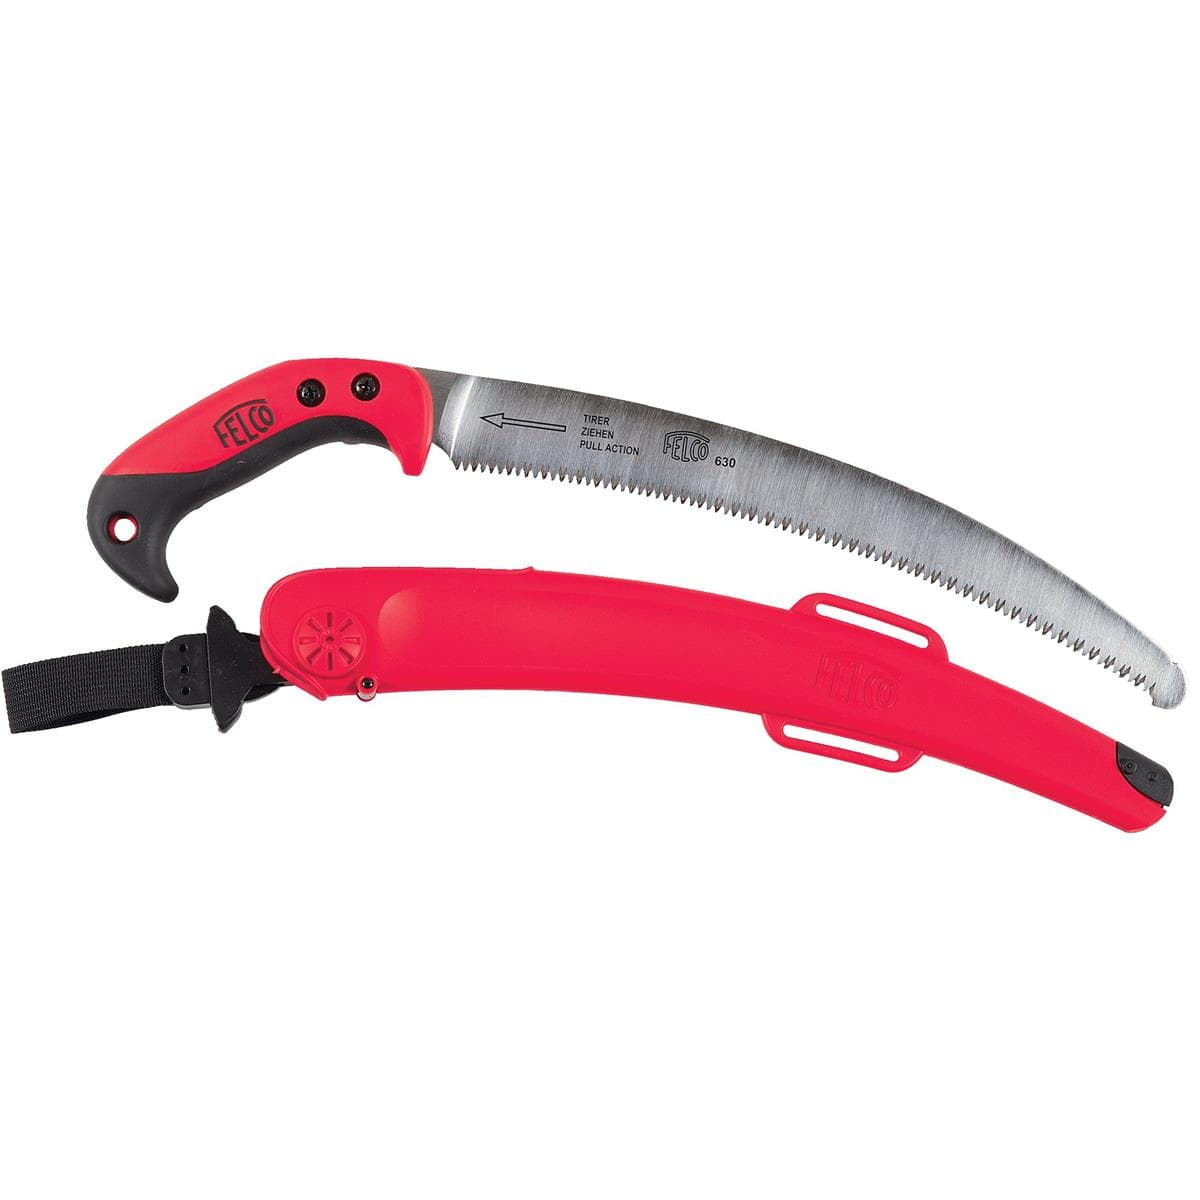 Felco Curved-Blade Pruning Saws